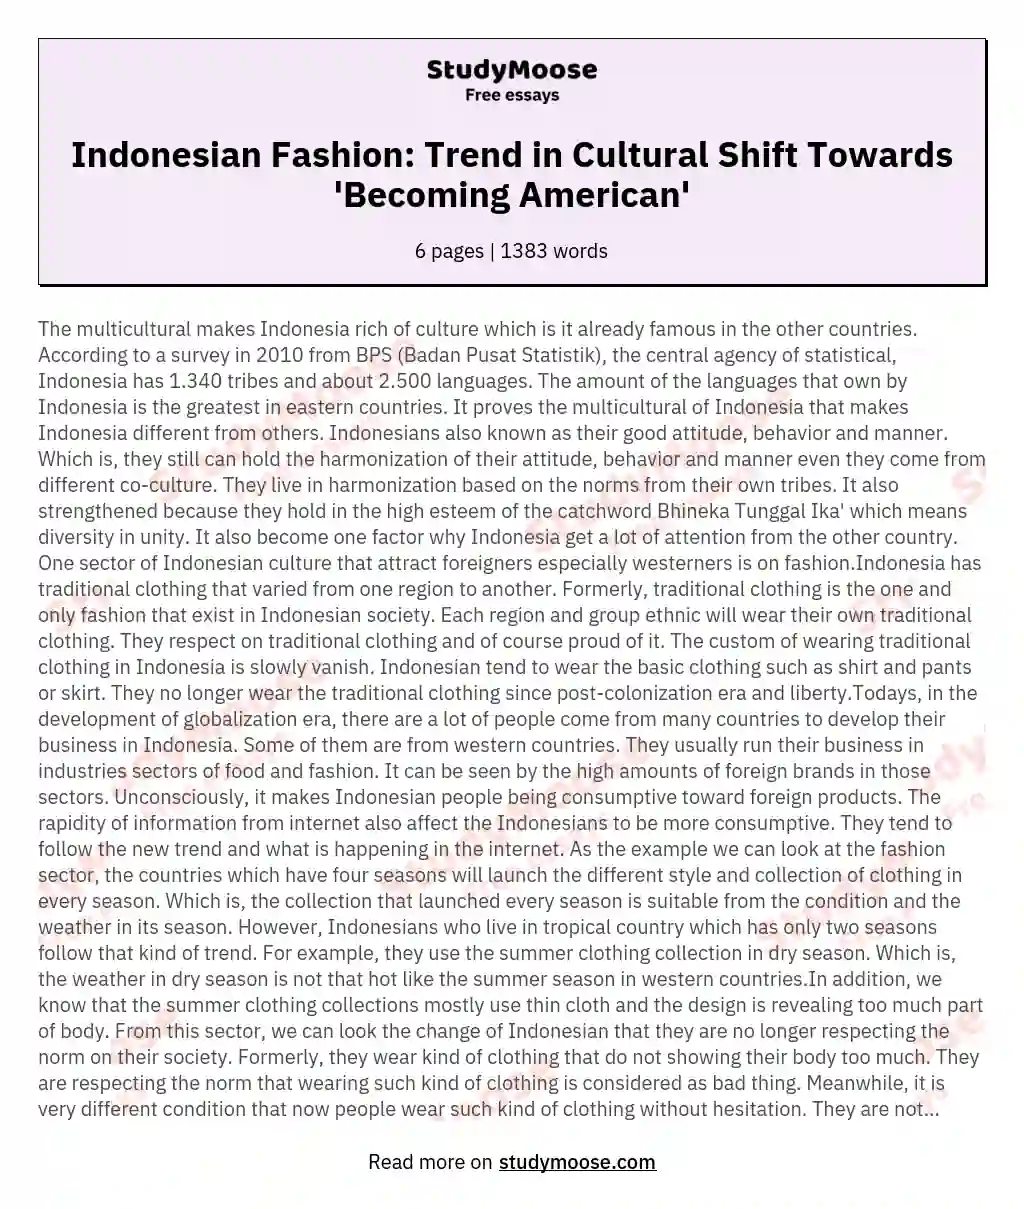 Indonesian Fashion: Trend in Cultural Shift Towards 'Becoming American' essay